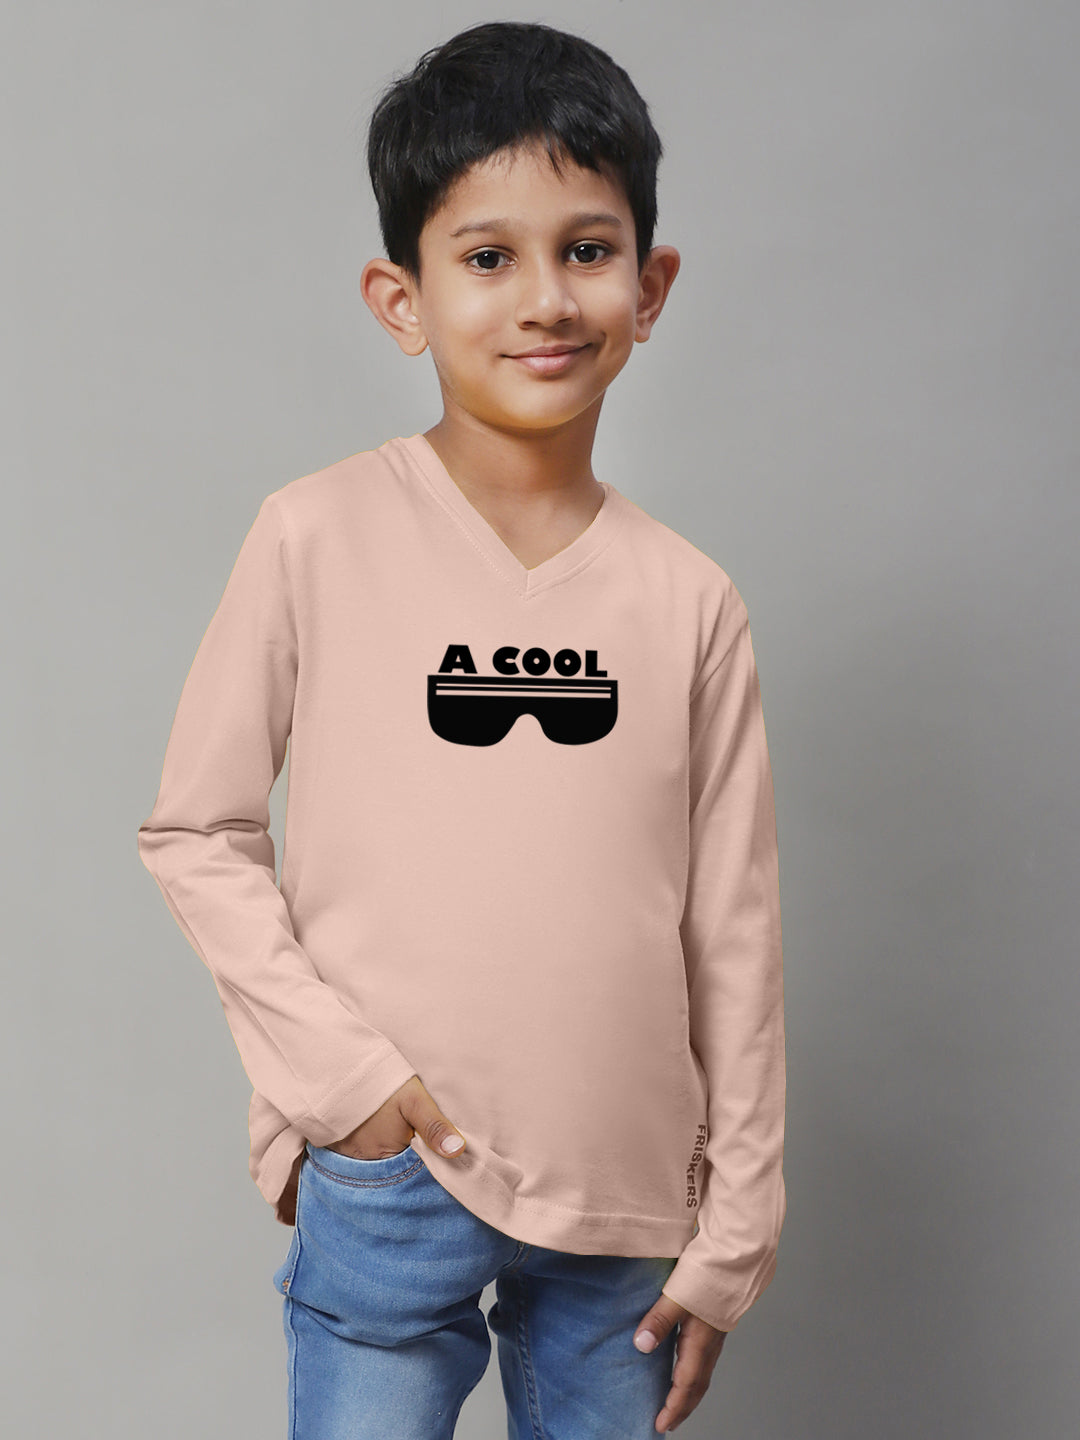 Boys Cool Full Sleeves Printed T-Shirt - Friskers